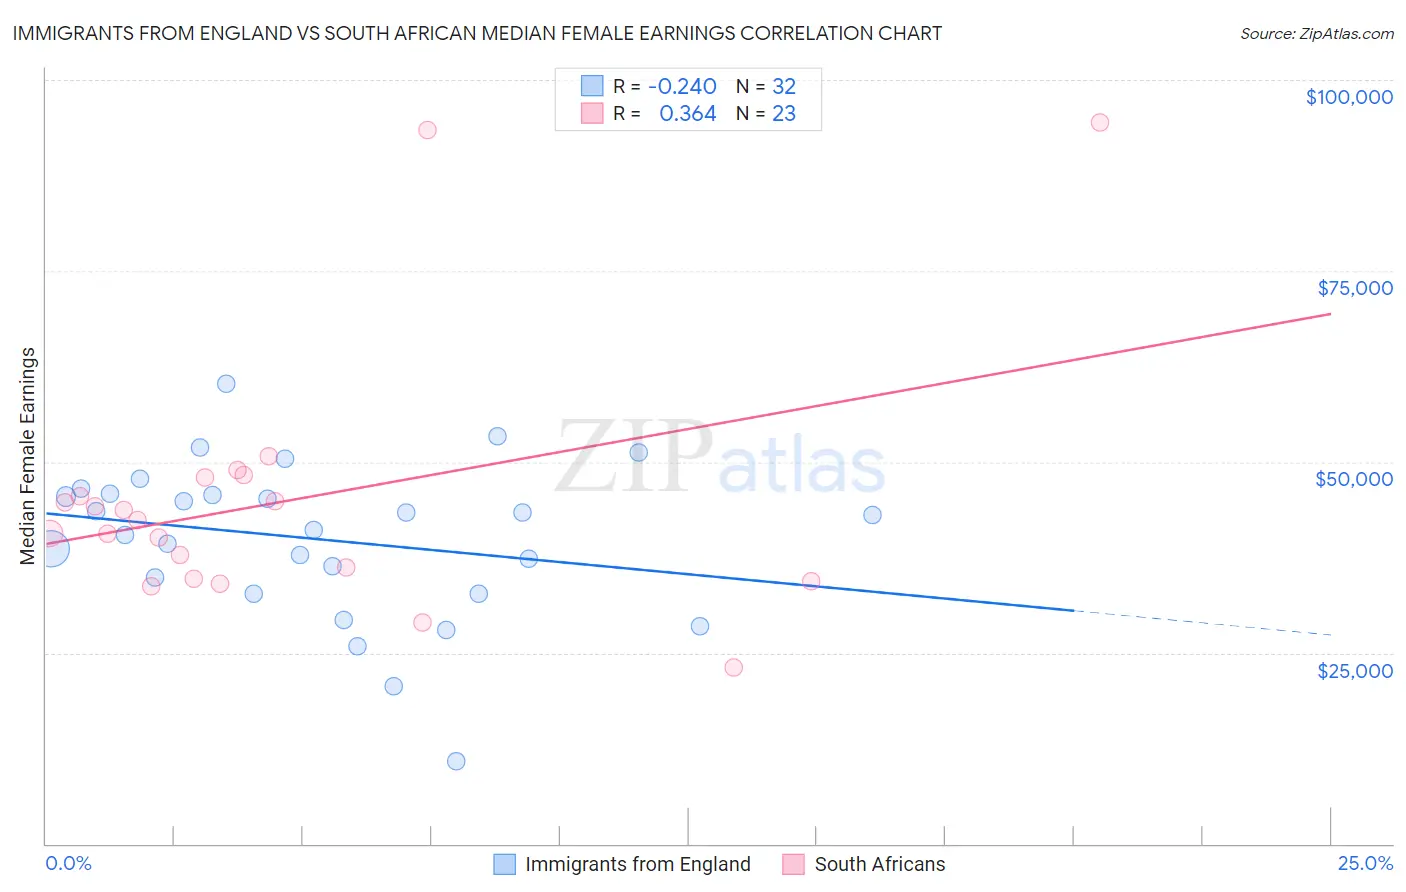 Immigrants from England vs South African Median Female Earnings